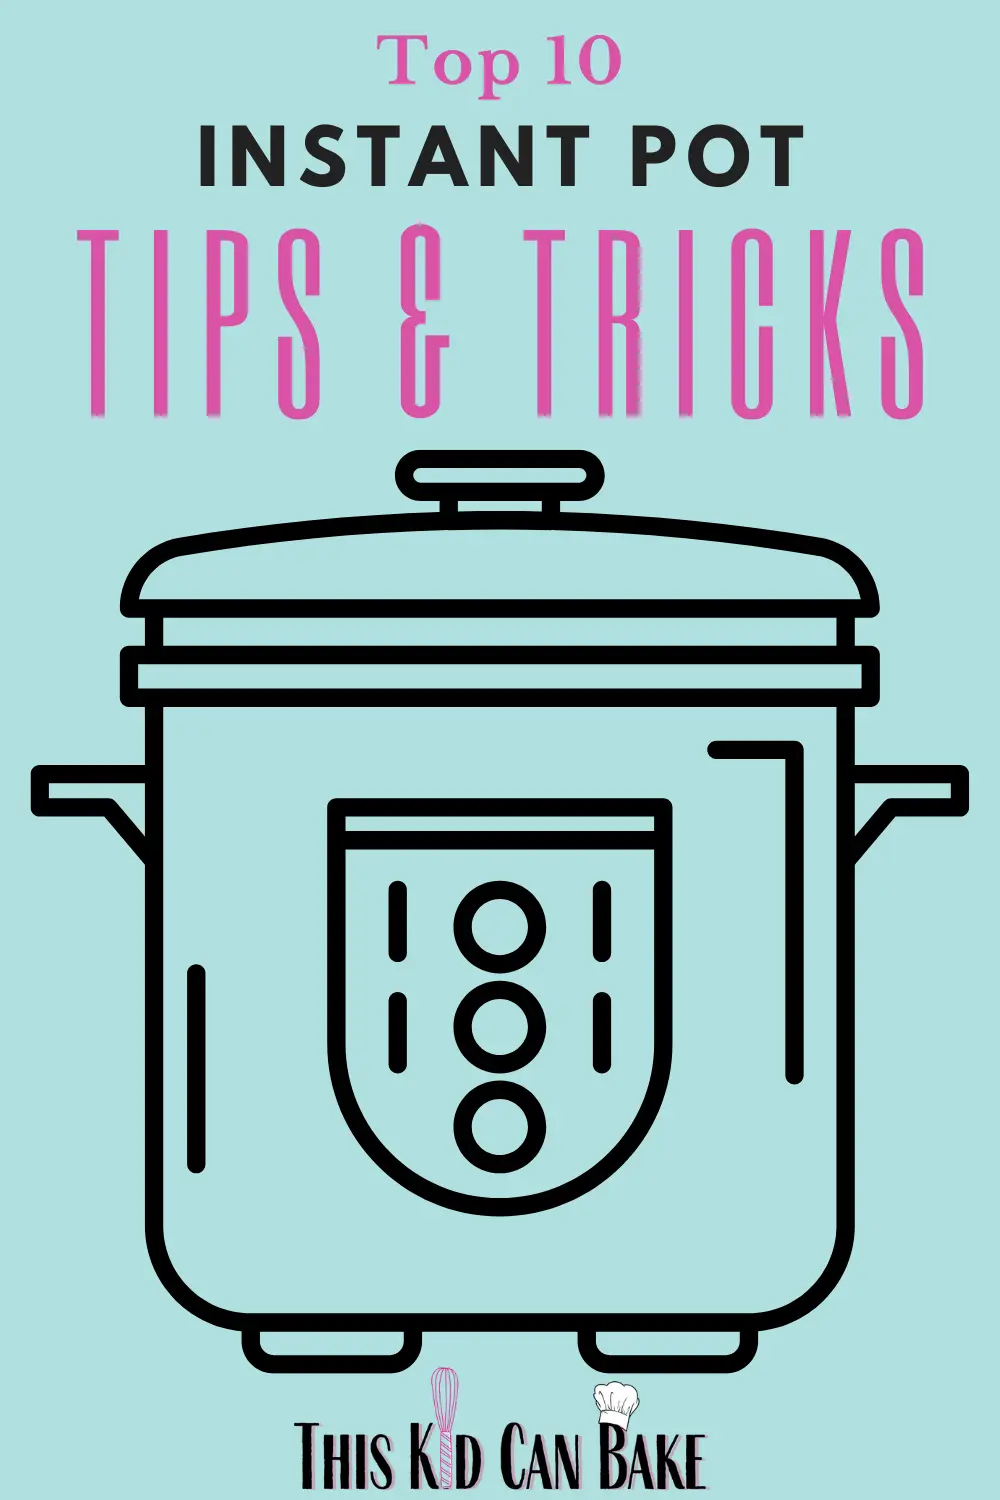 A picture of an Instant Pot illustration on a light blue background with text that reads "Top 10 Instant Pot Tips & Tricks" in black and pink colored font.